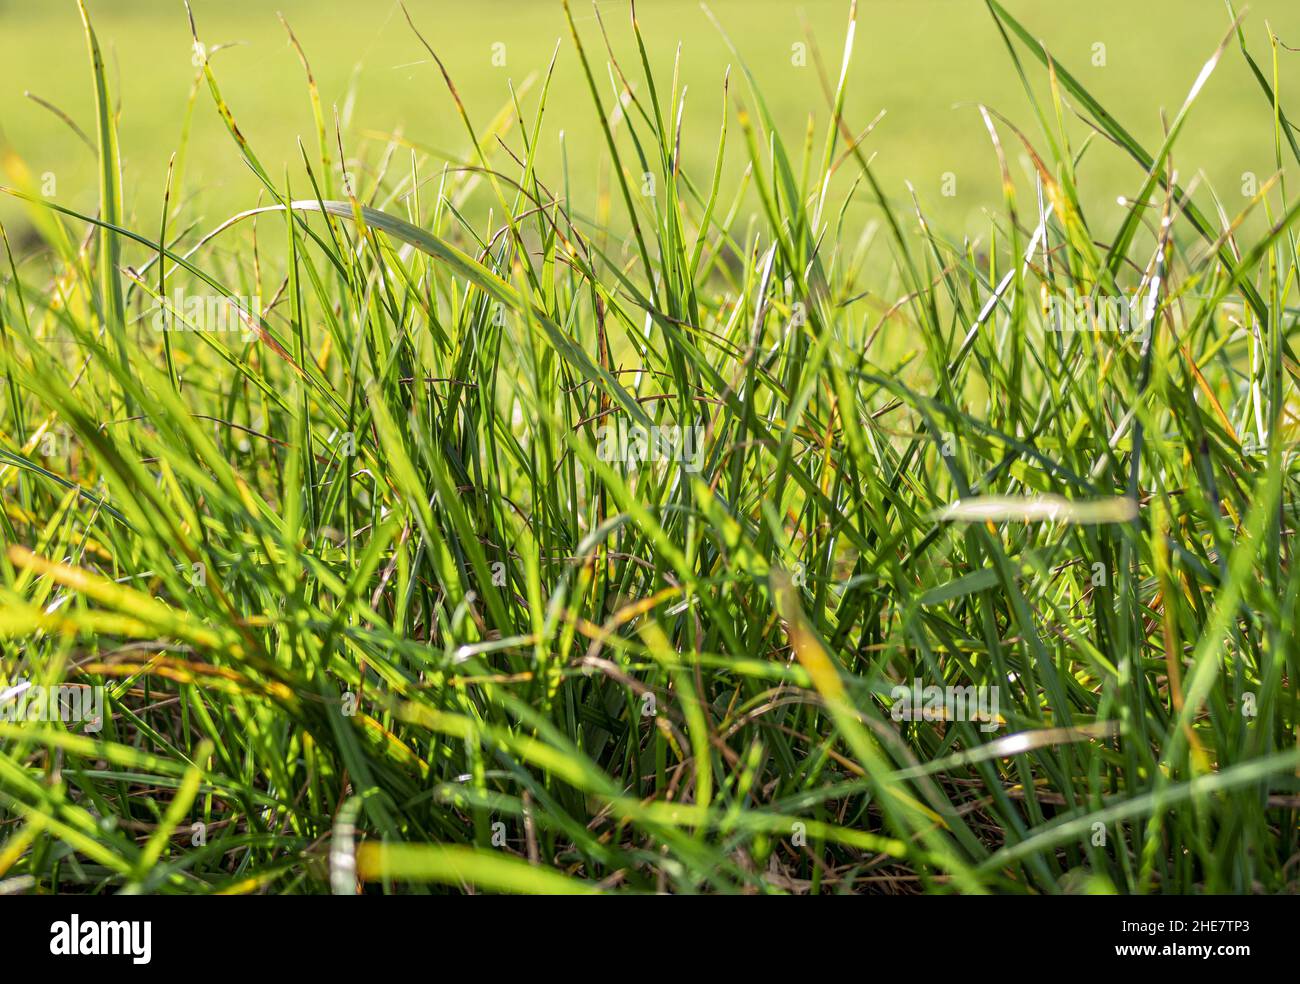 Blades of grass in a meadow Stock Photo